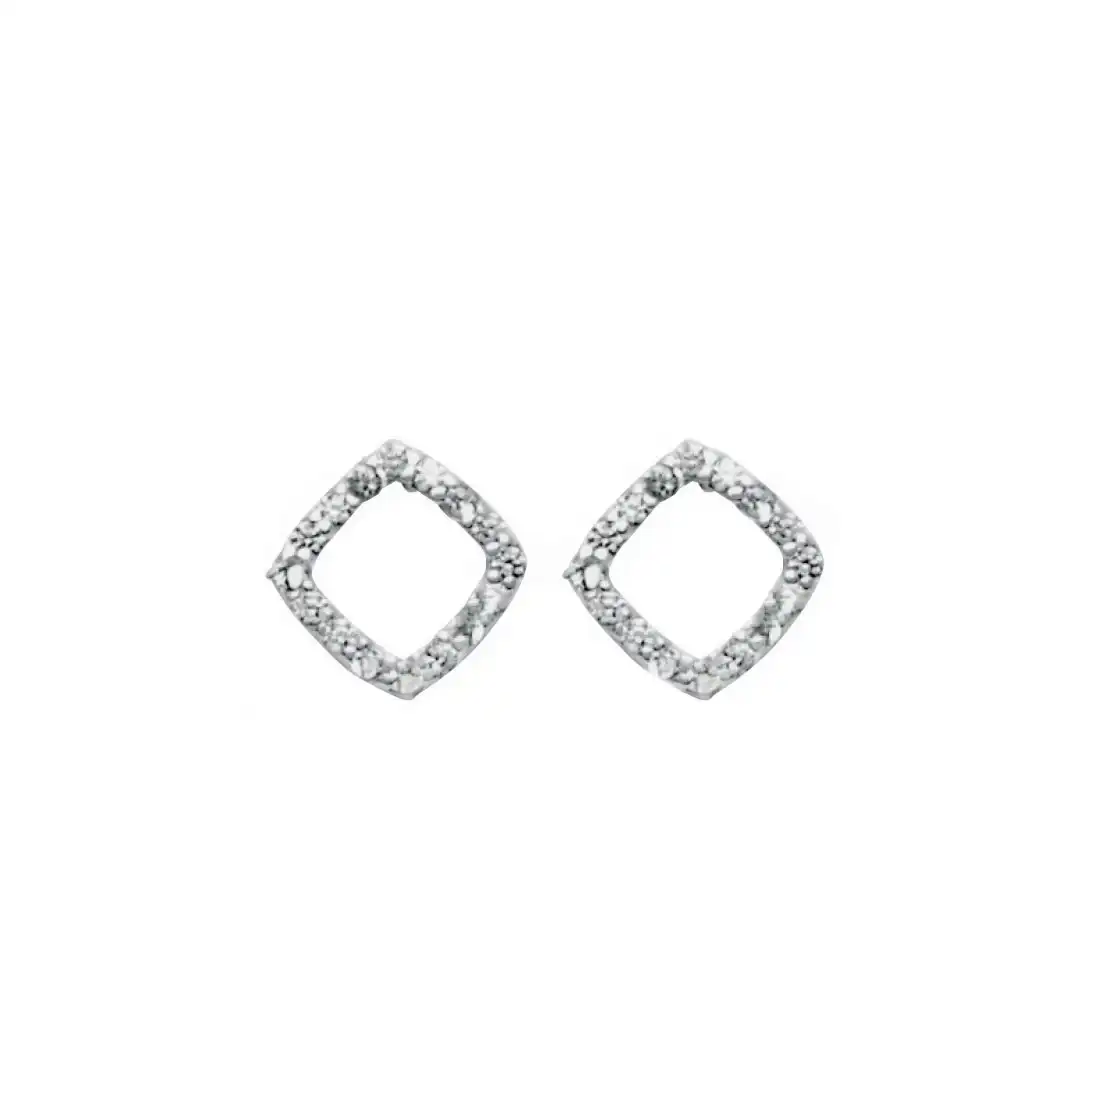 Sterling Silver and Cubic Zirconia Open Square Stud Earrings